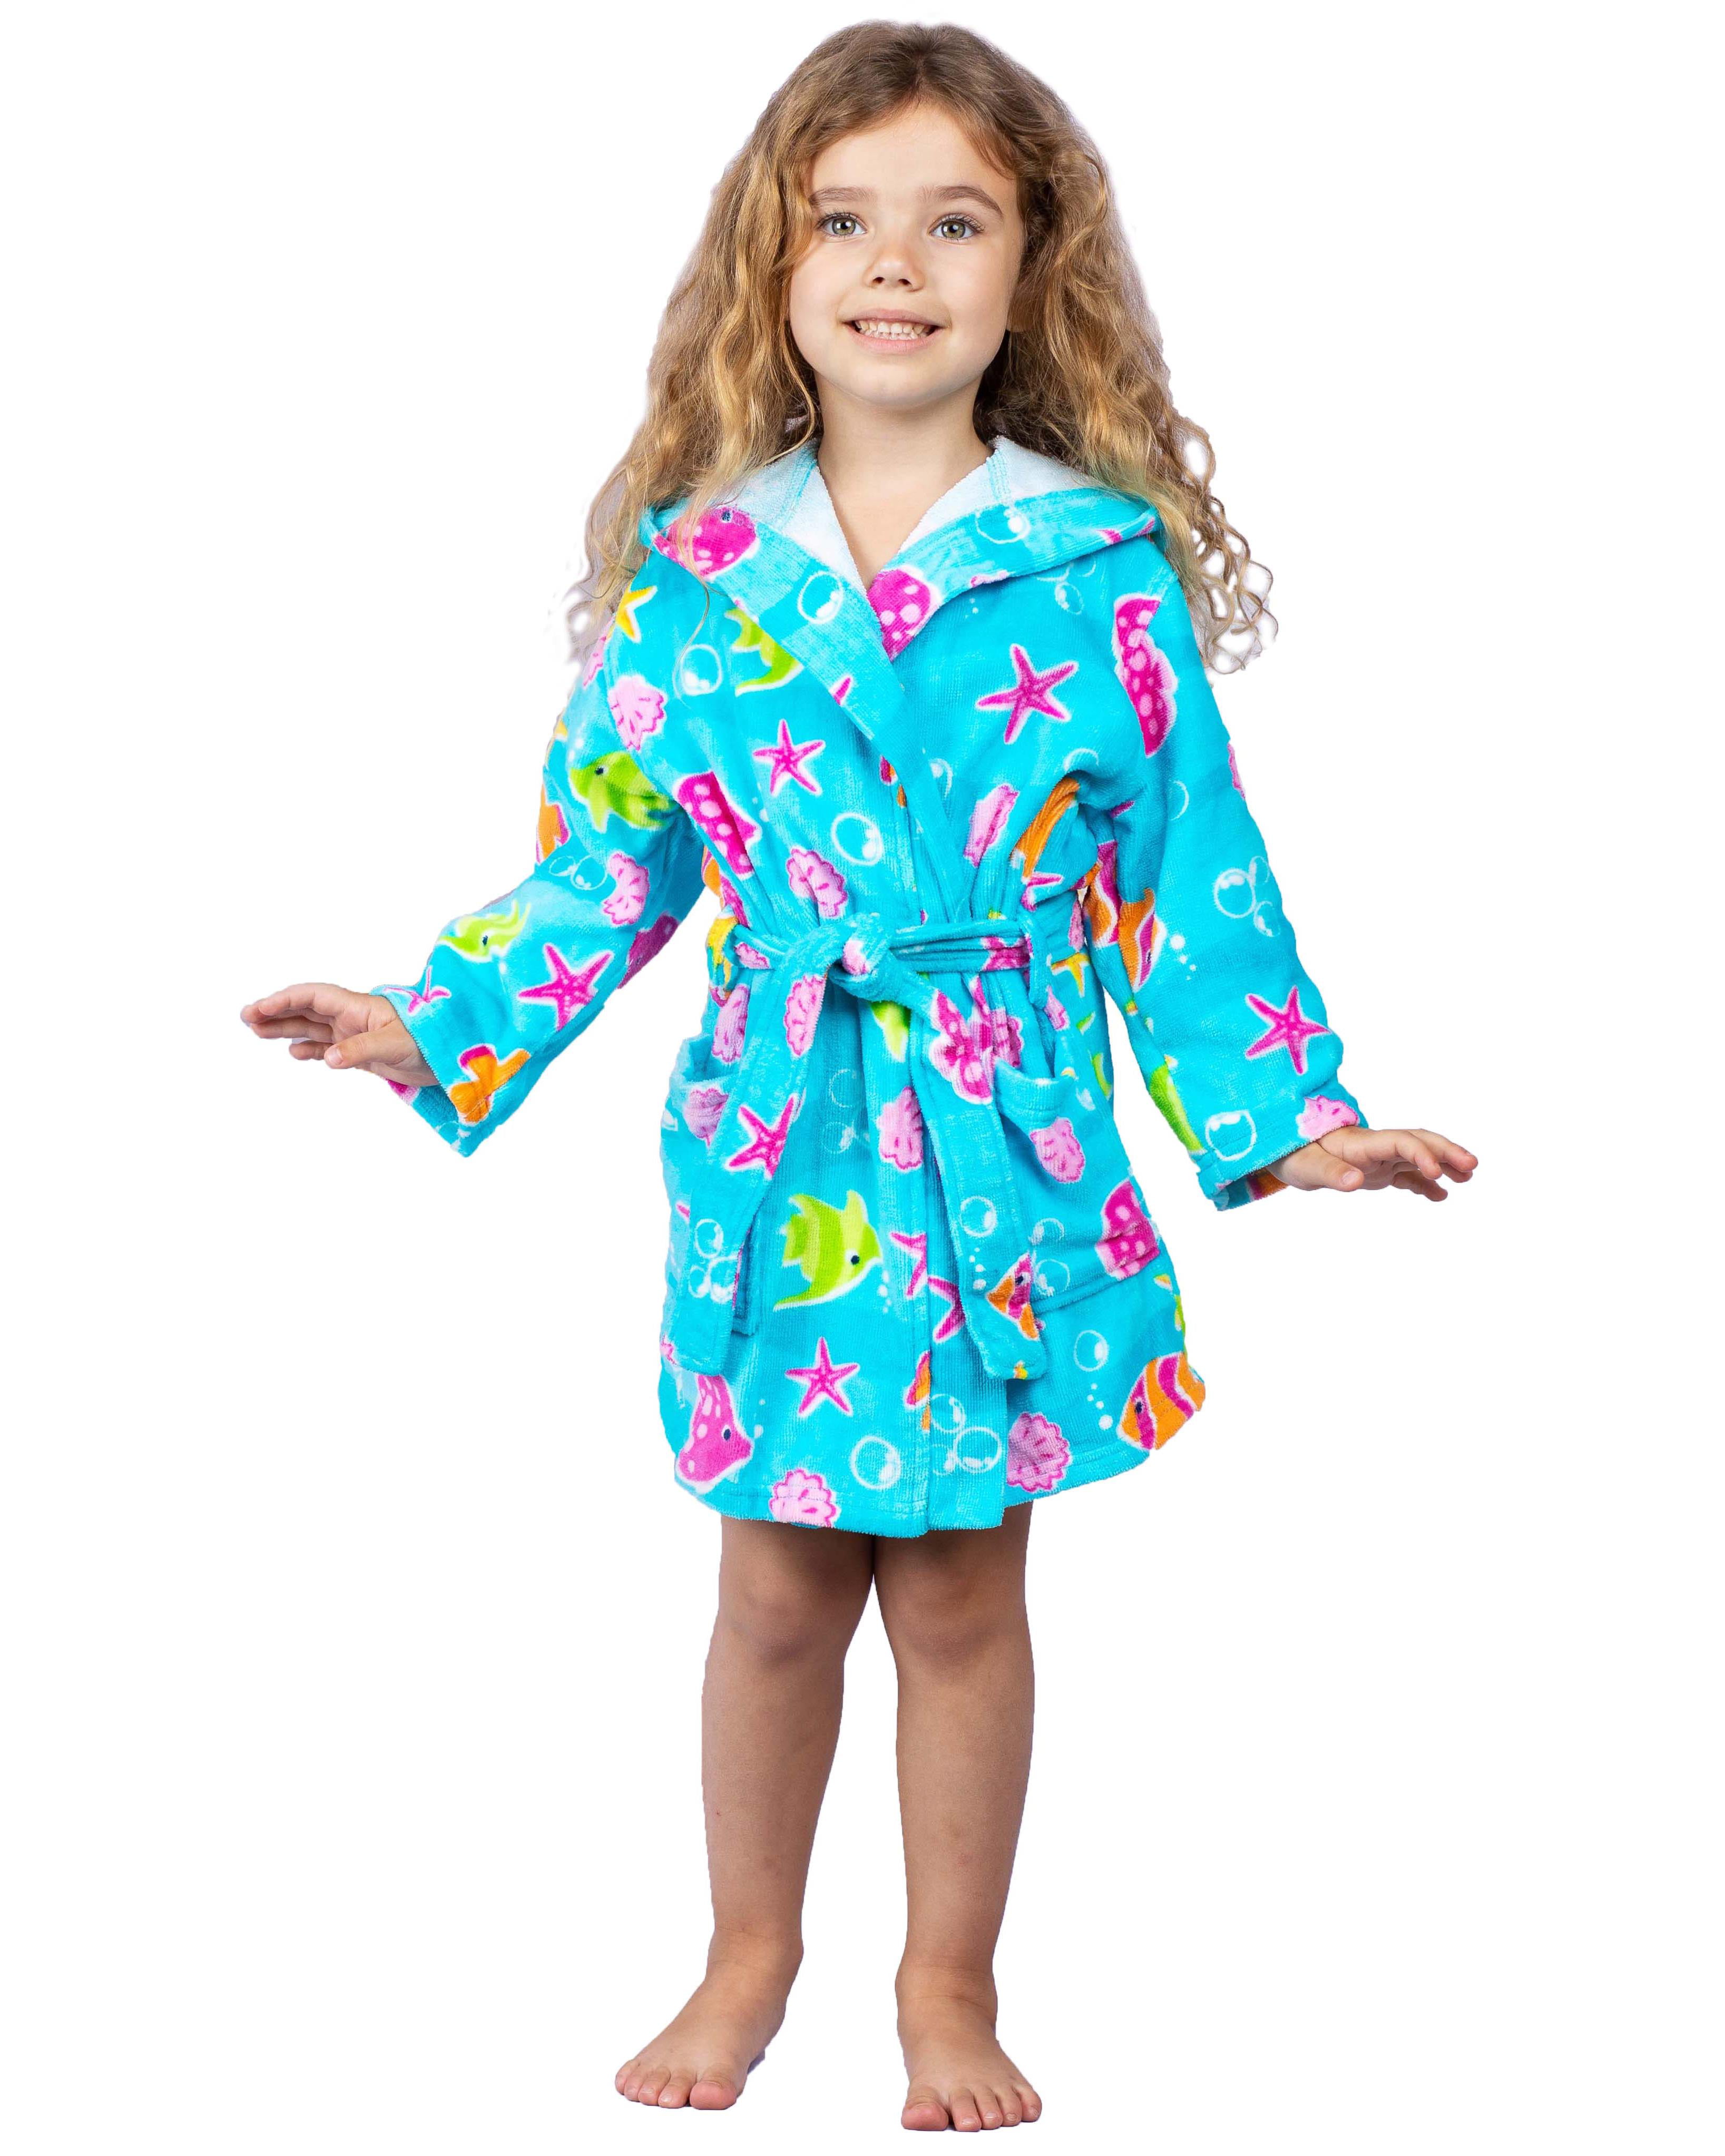 KIDS HOODED BATHROBE GIRL 100% EGYPTIAN COTTON DRESSING GOWN TERRY TOWELLING ROB 